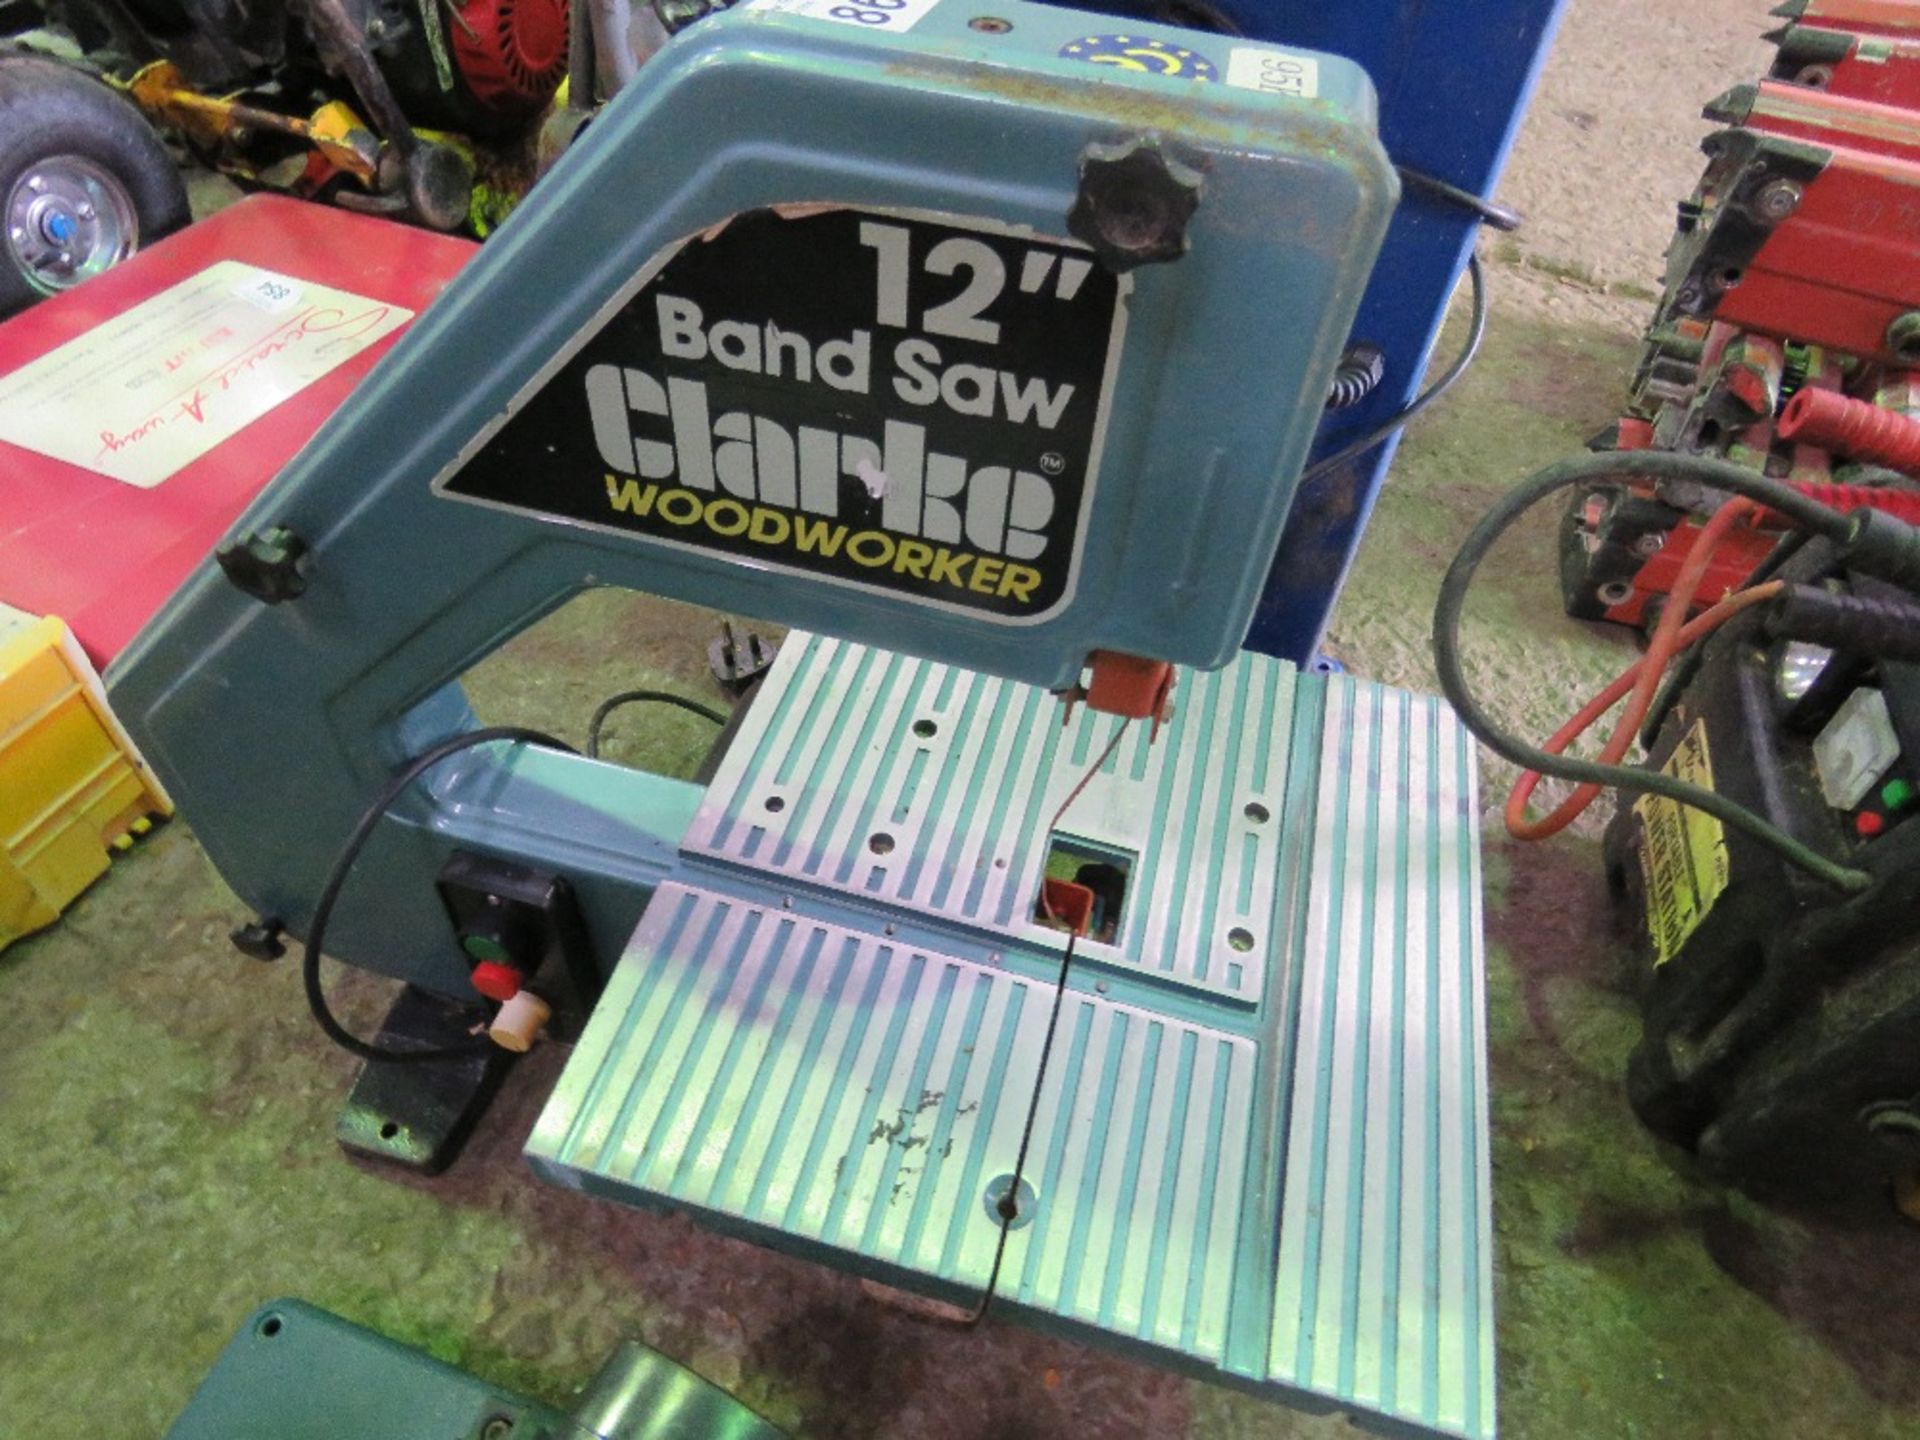 SMALL SIZED HOBBY BANDSAW, 240VOLT POWERED. UNTESTED, CONDITION UNKNOWN.